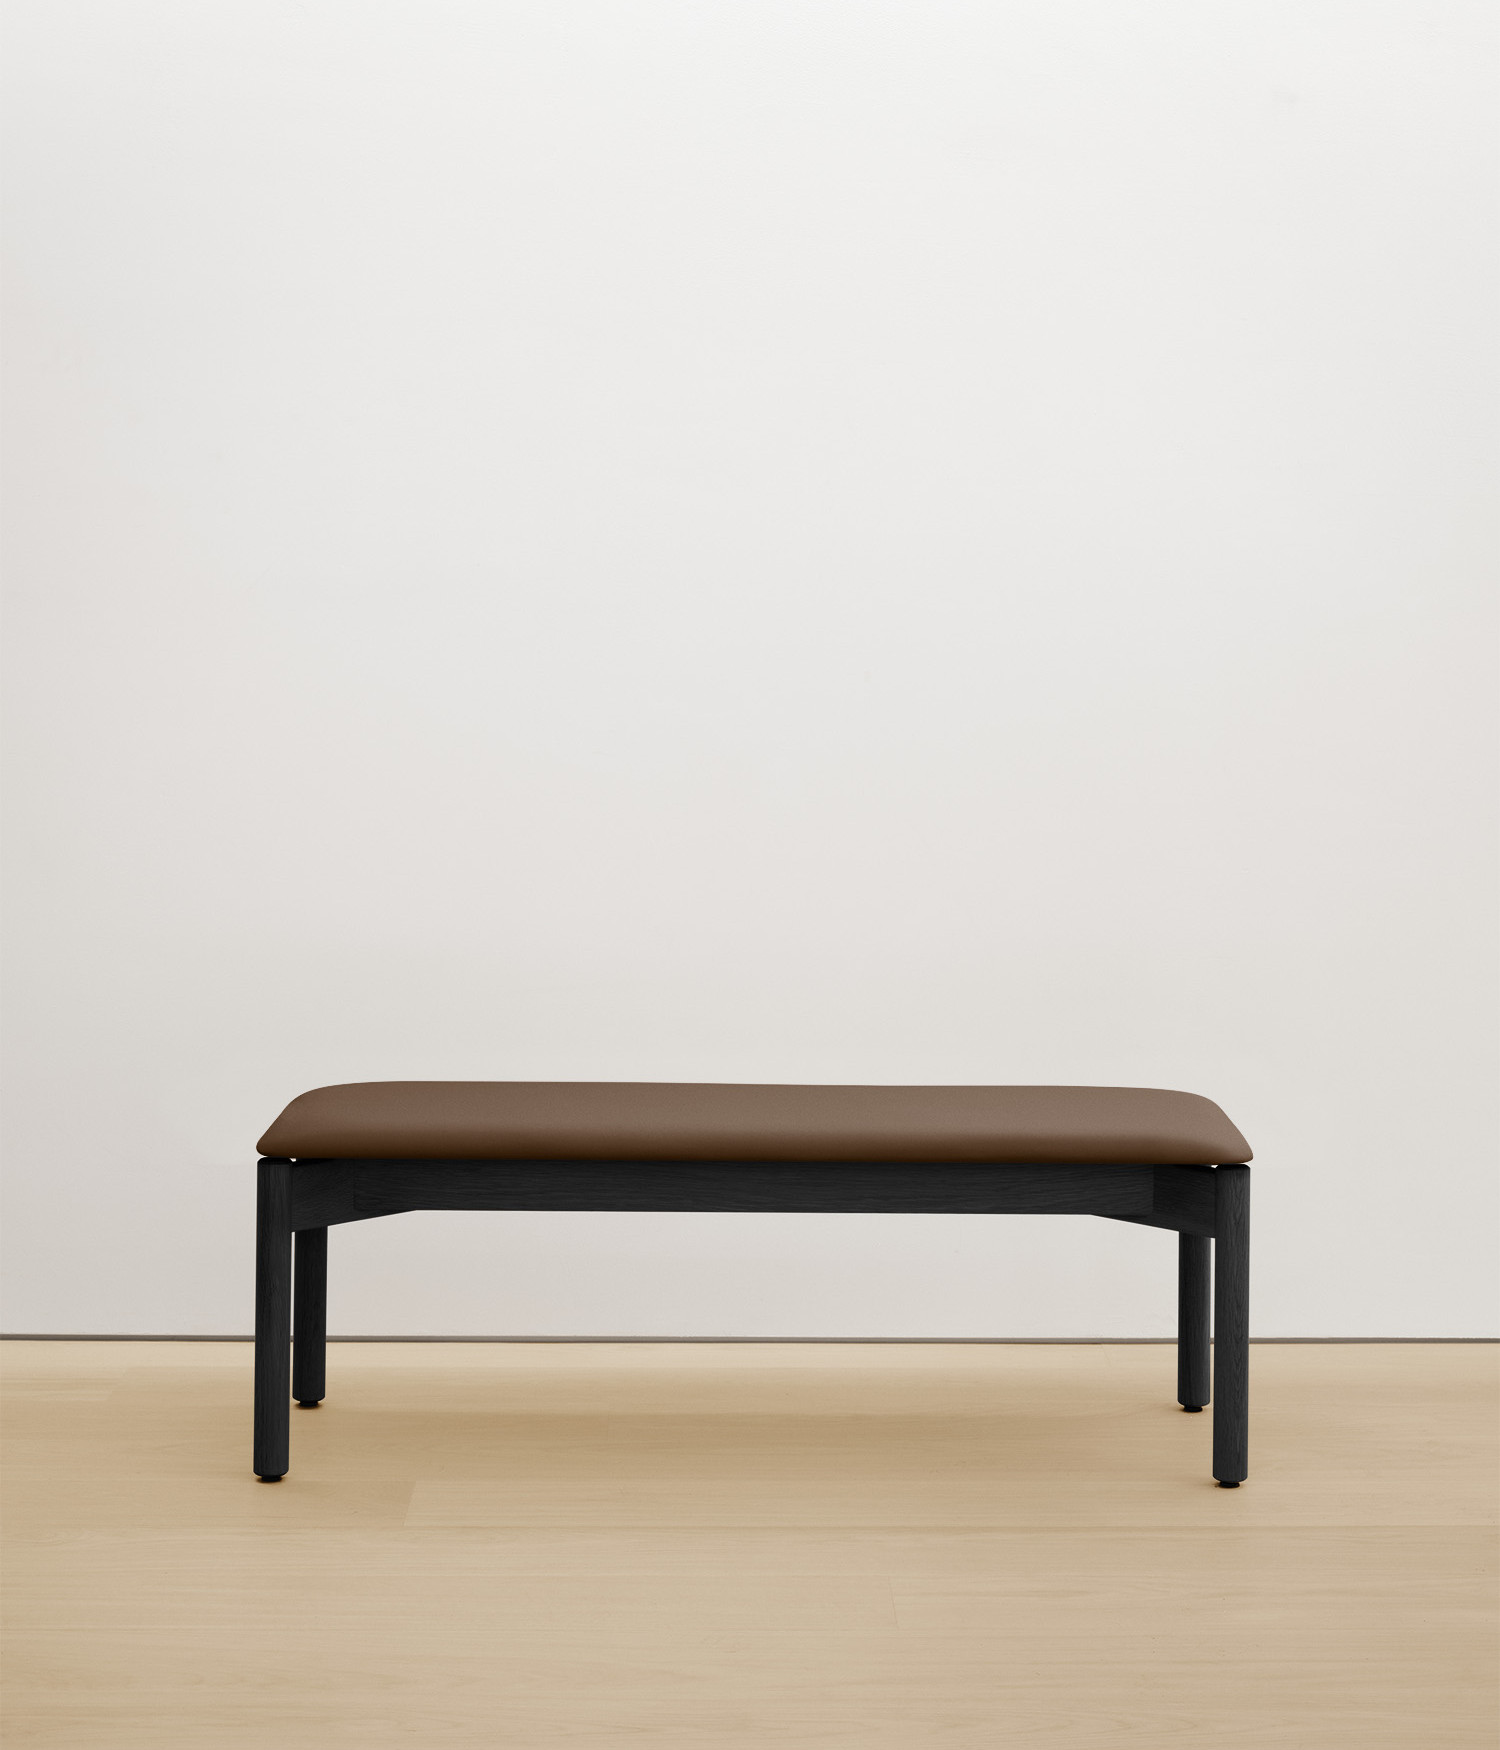  black-stained-oak bench with umber color upholstered seat